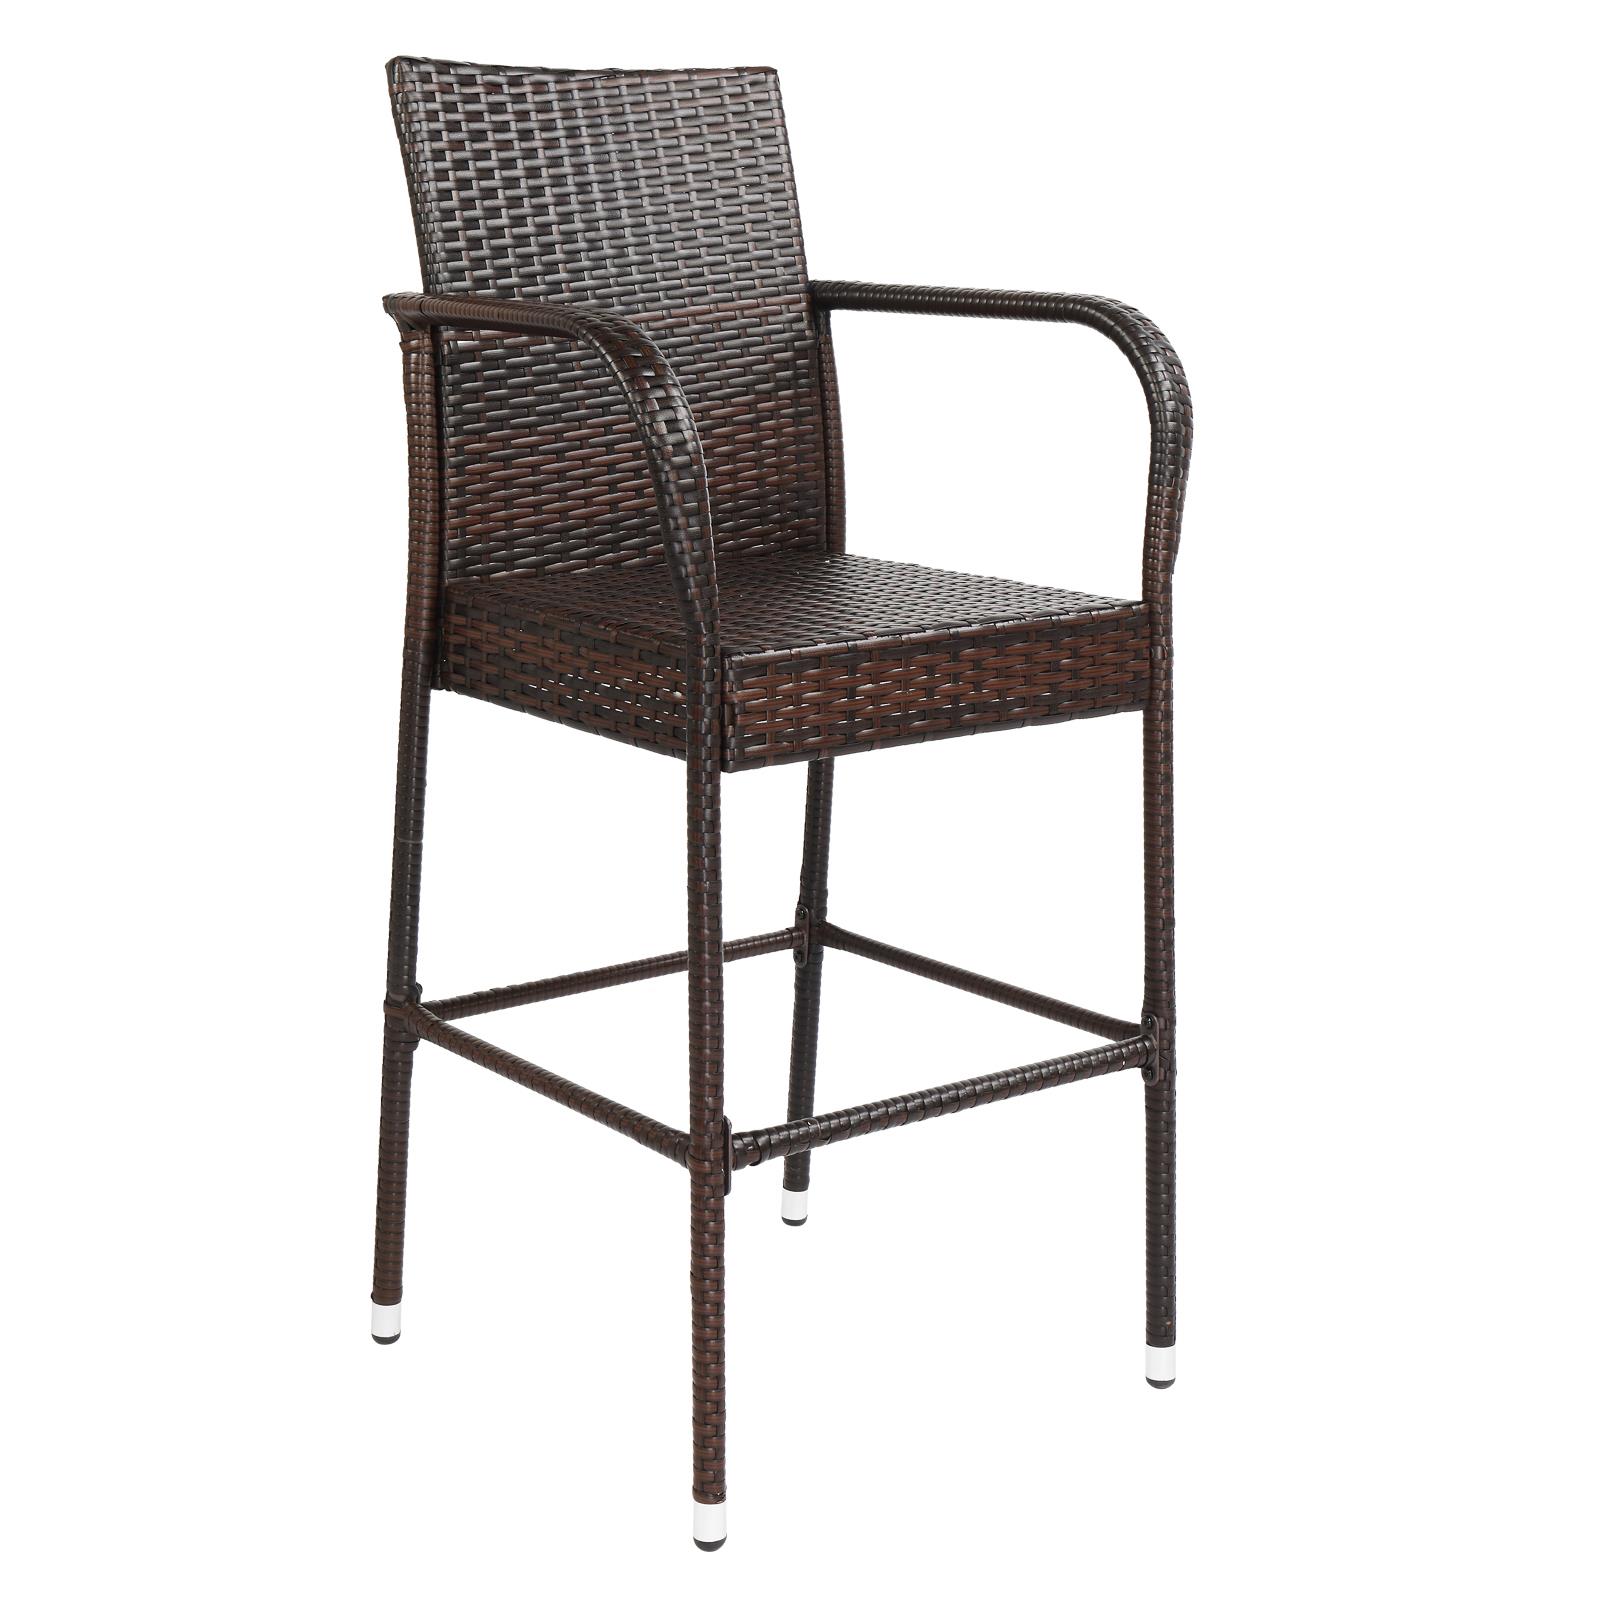 SamyoHome Wicker Bar Stools Outdoor Set of 2, Outdoor Bar Chairs - image 4 of 11